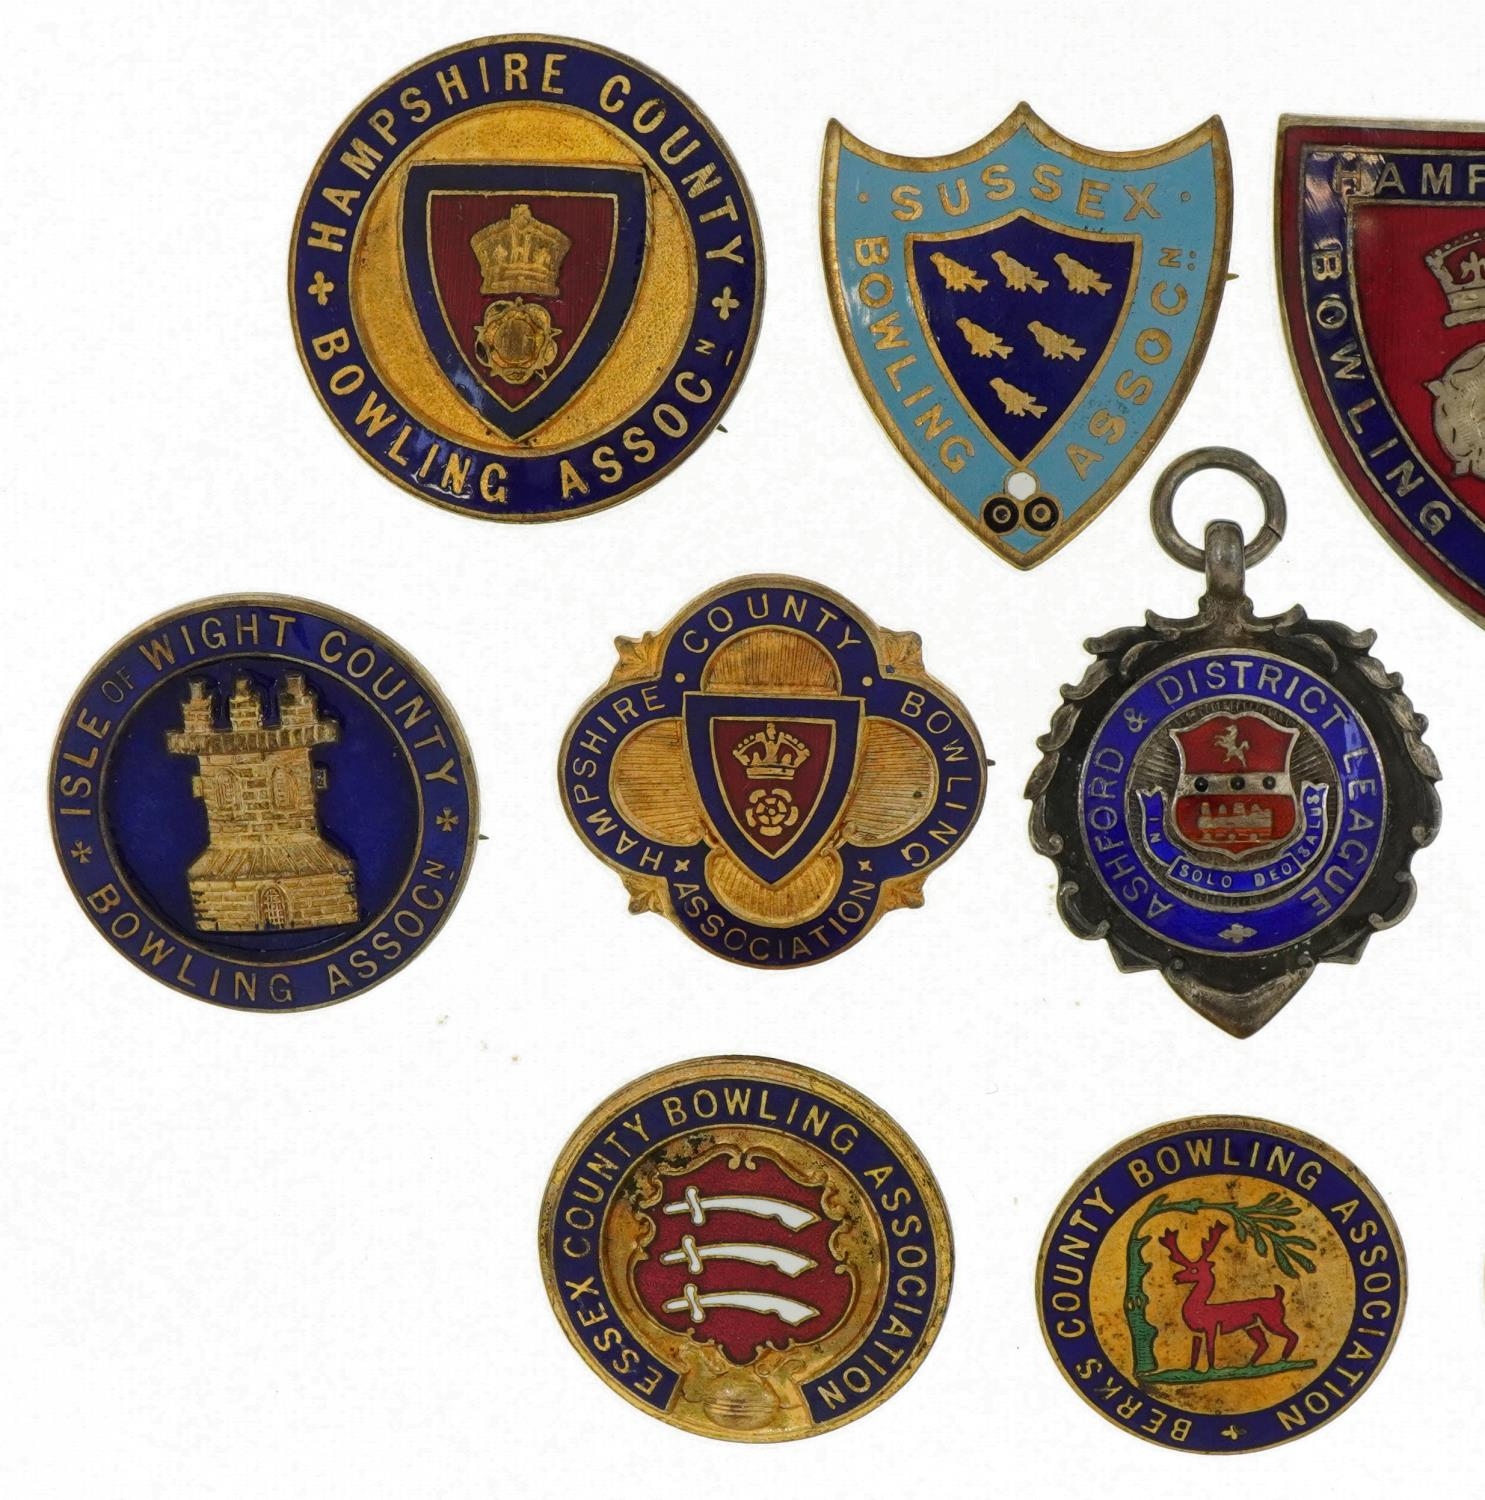 Bowling enamel pin badges and a silver and enamel jewel including Sussex Bowling Association and - Image 2 of 4